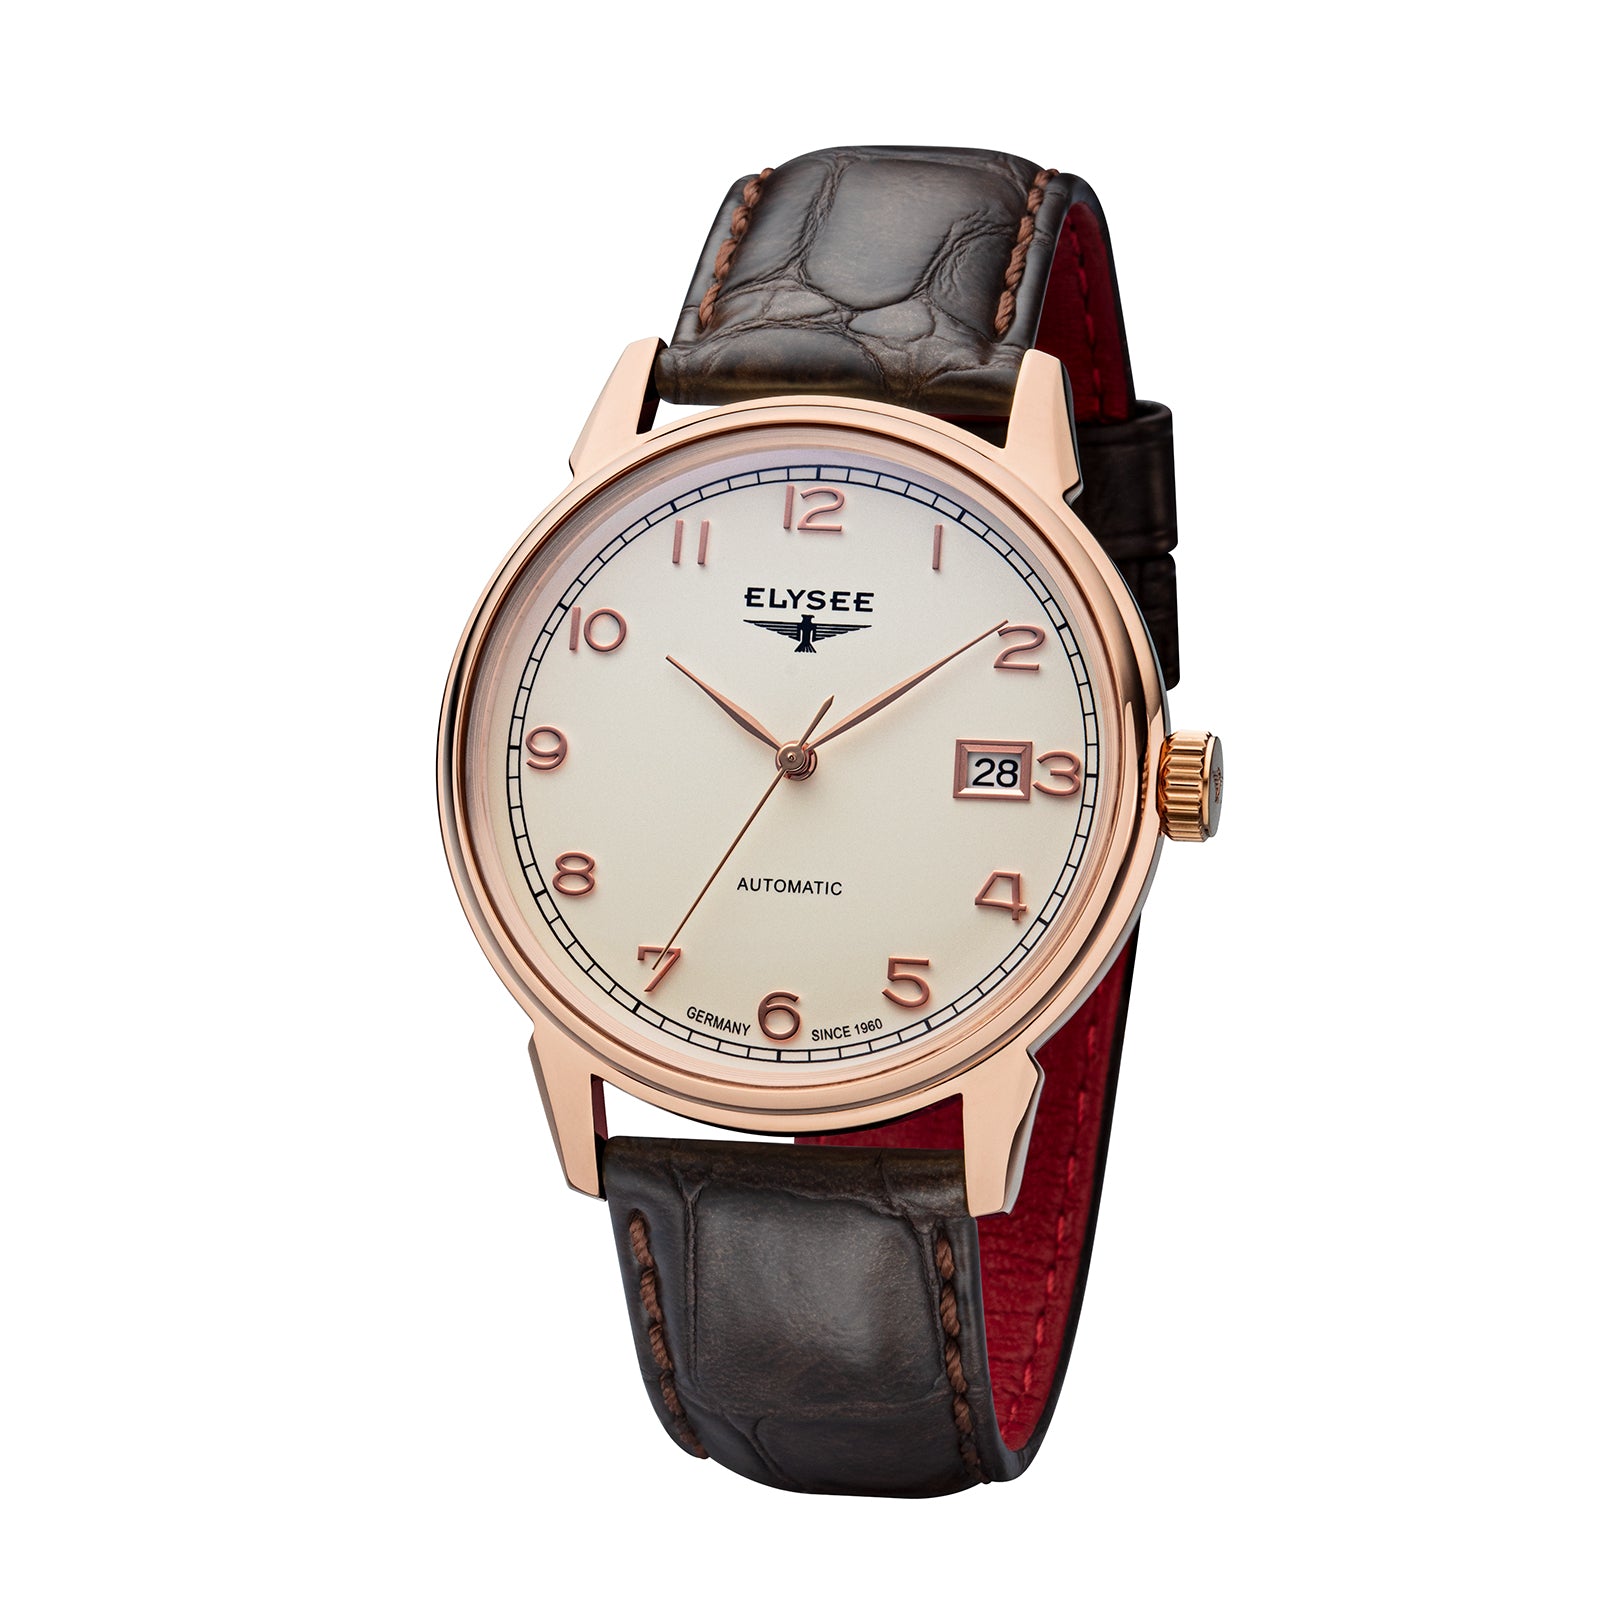 Vintage Master Automatic - Elysee 80560 Elysee watch Uhren automatic Watches – - 